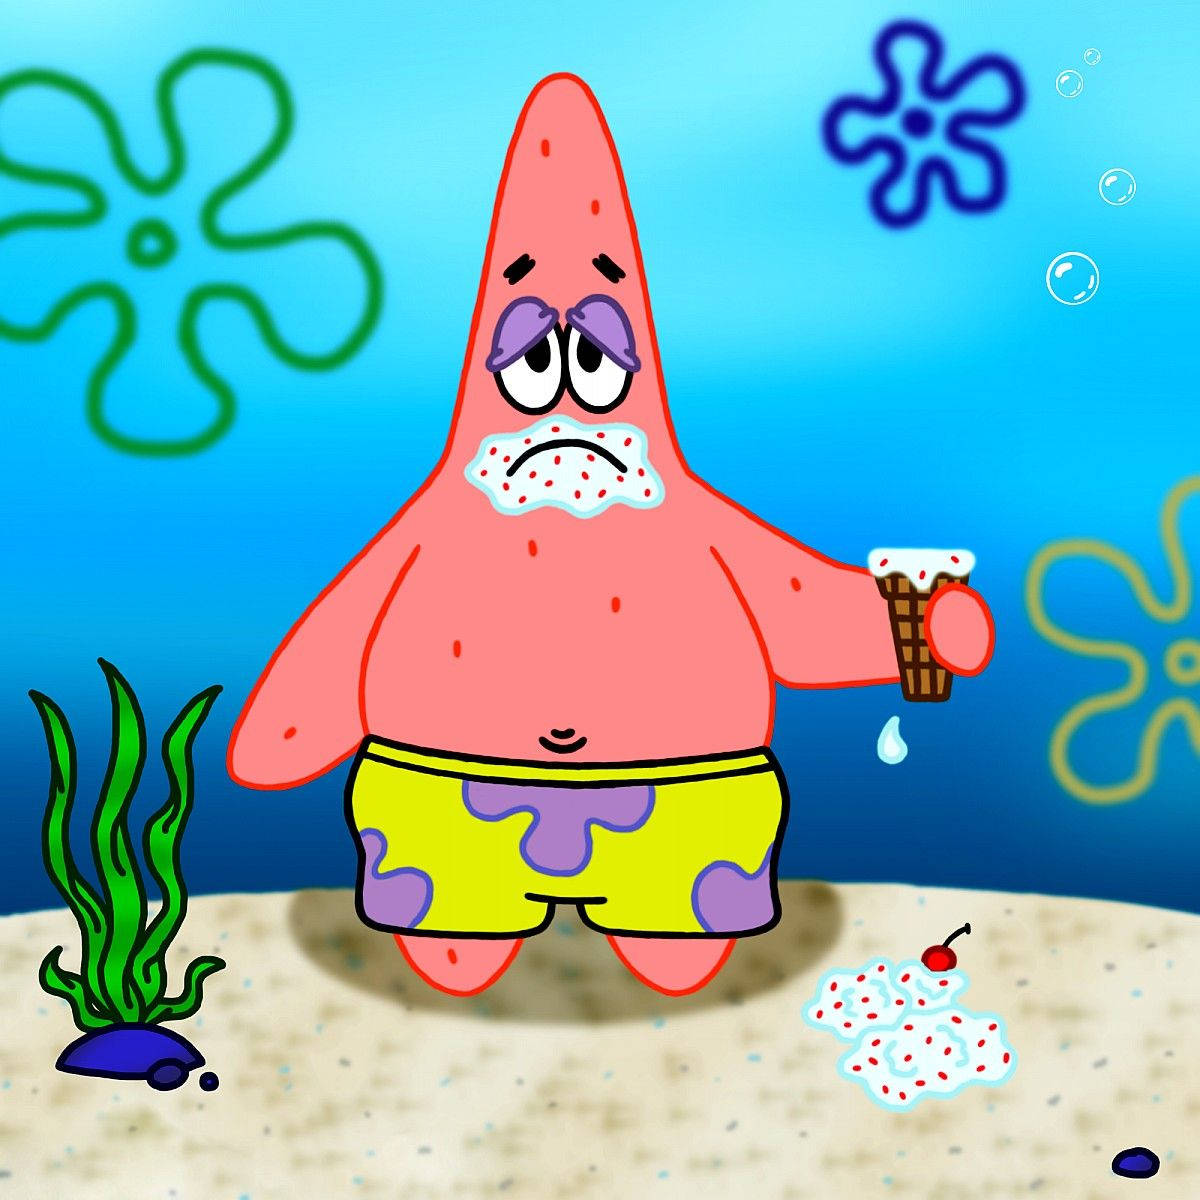 Clumsy Patrick Star With Ice Cream